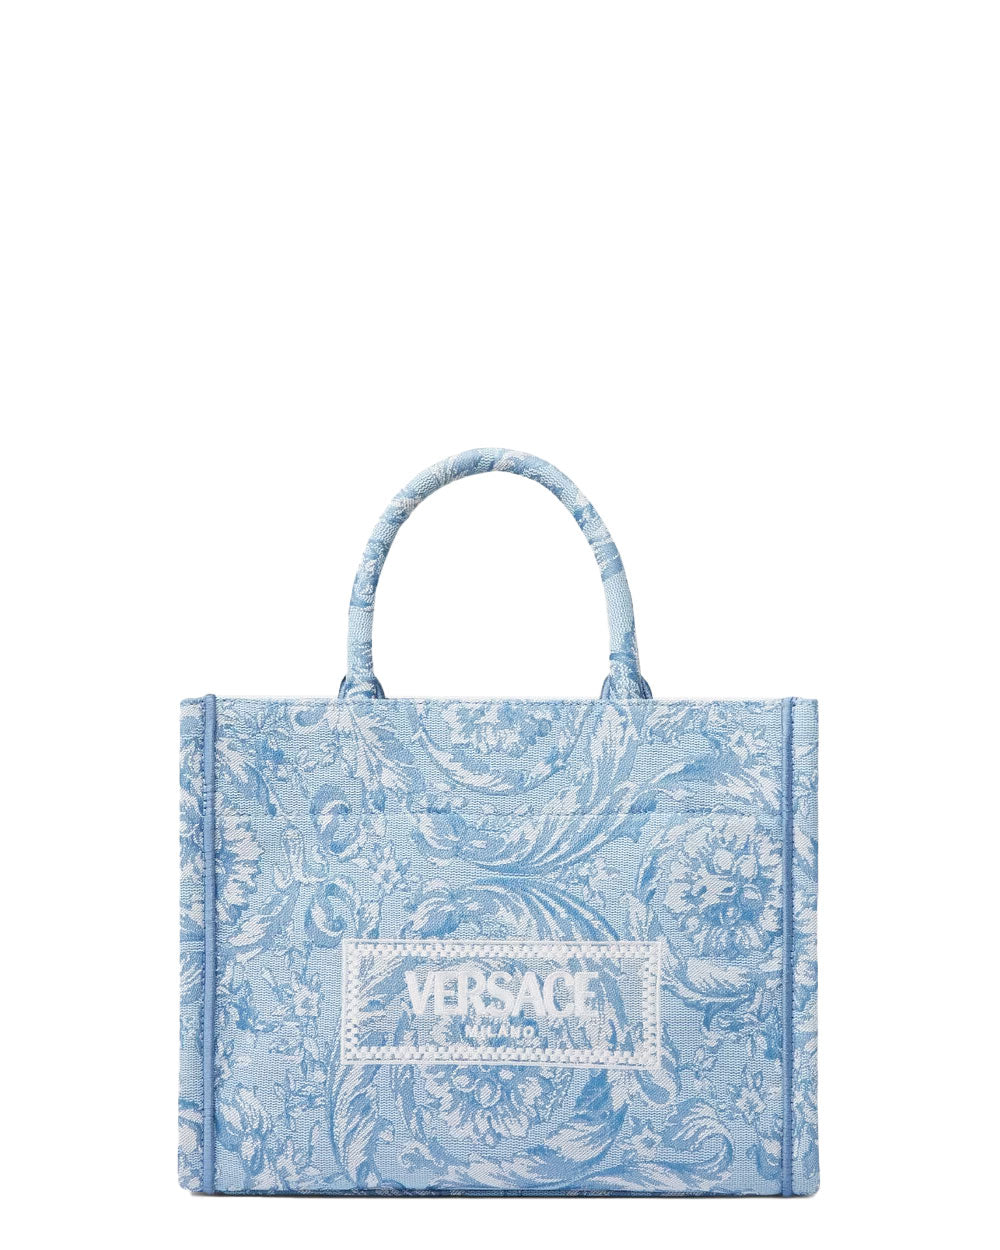 Barocco Athena Small Tote Bag in Baby Blue